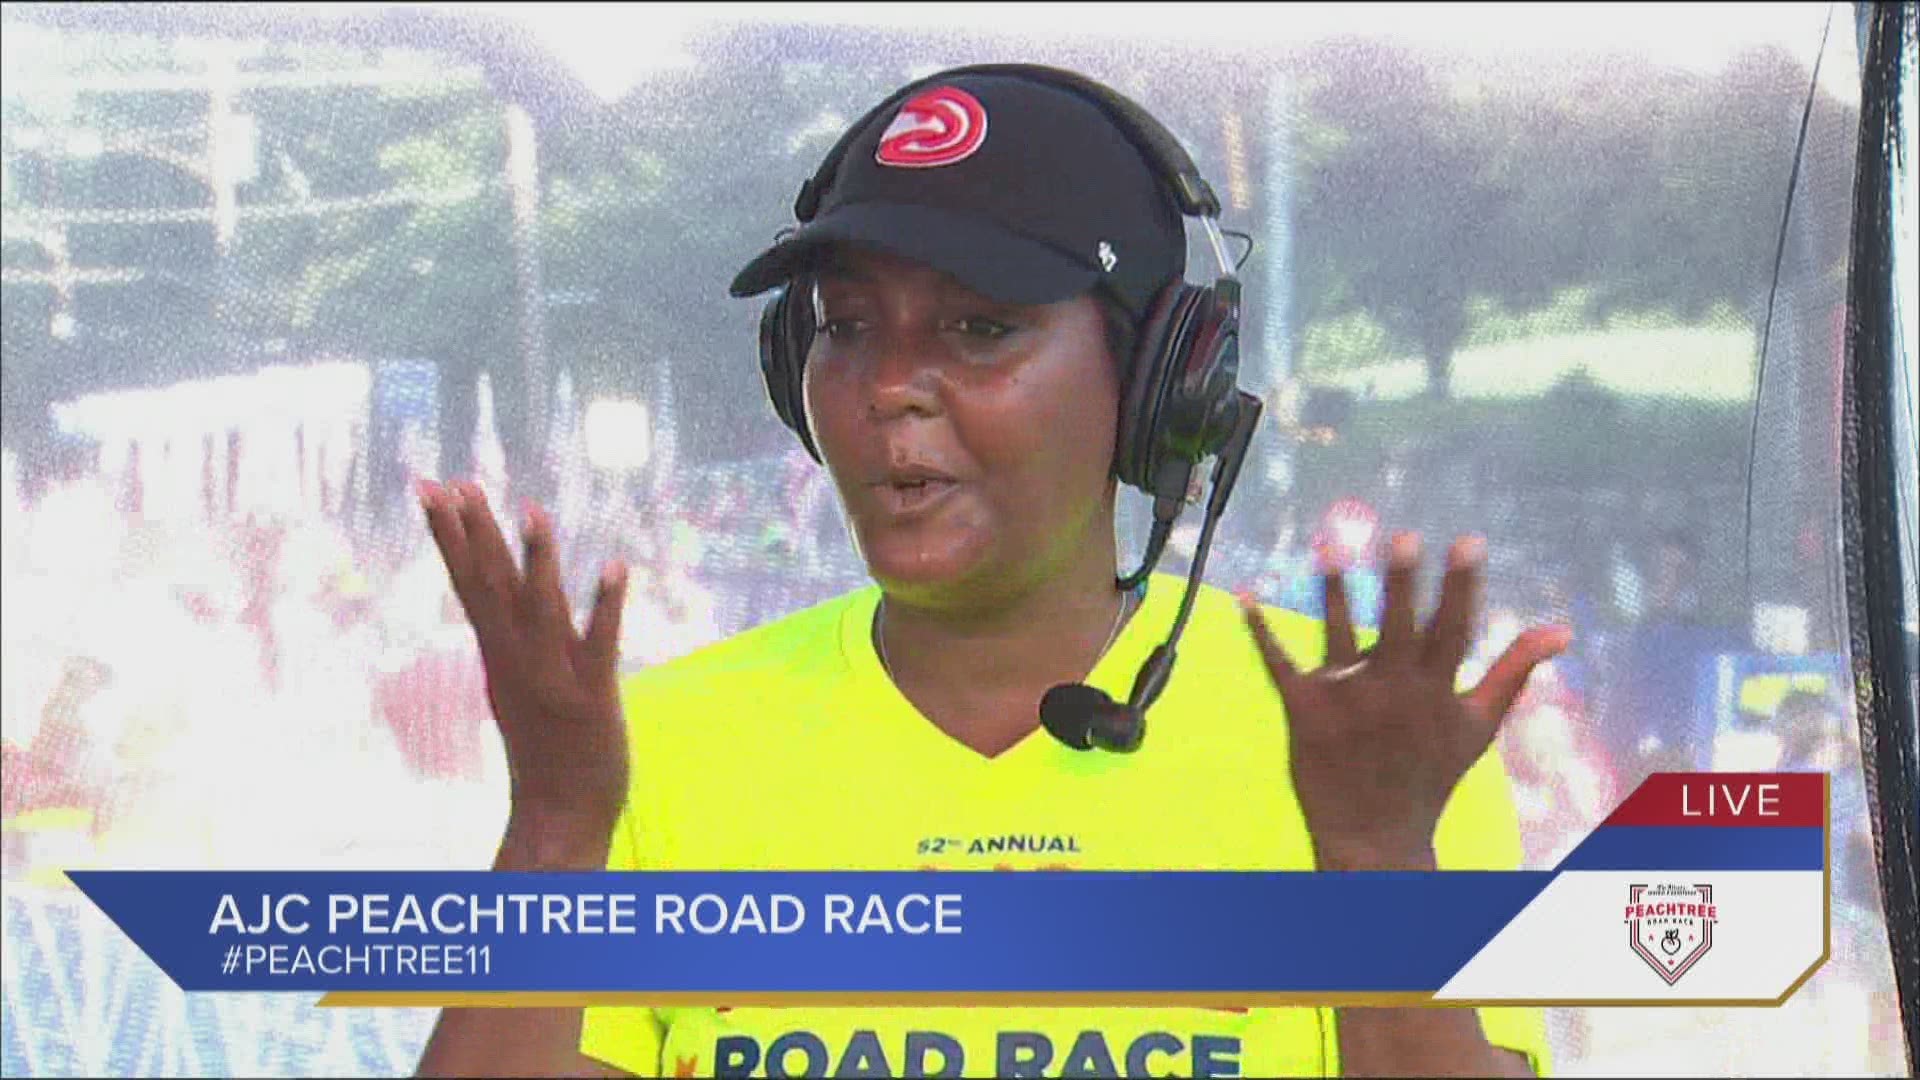 She said she got "caught up in the moment" with her 13-year-old and ran most of the race.